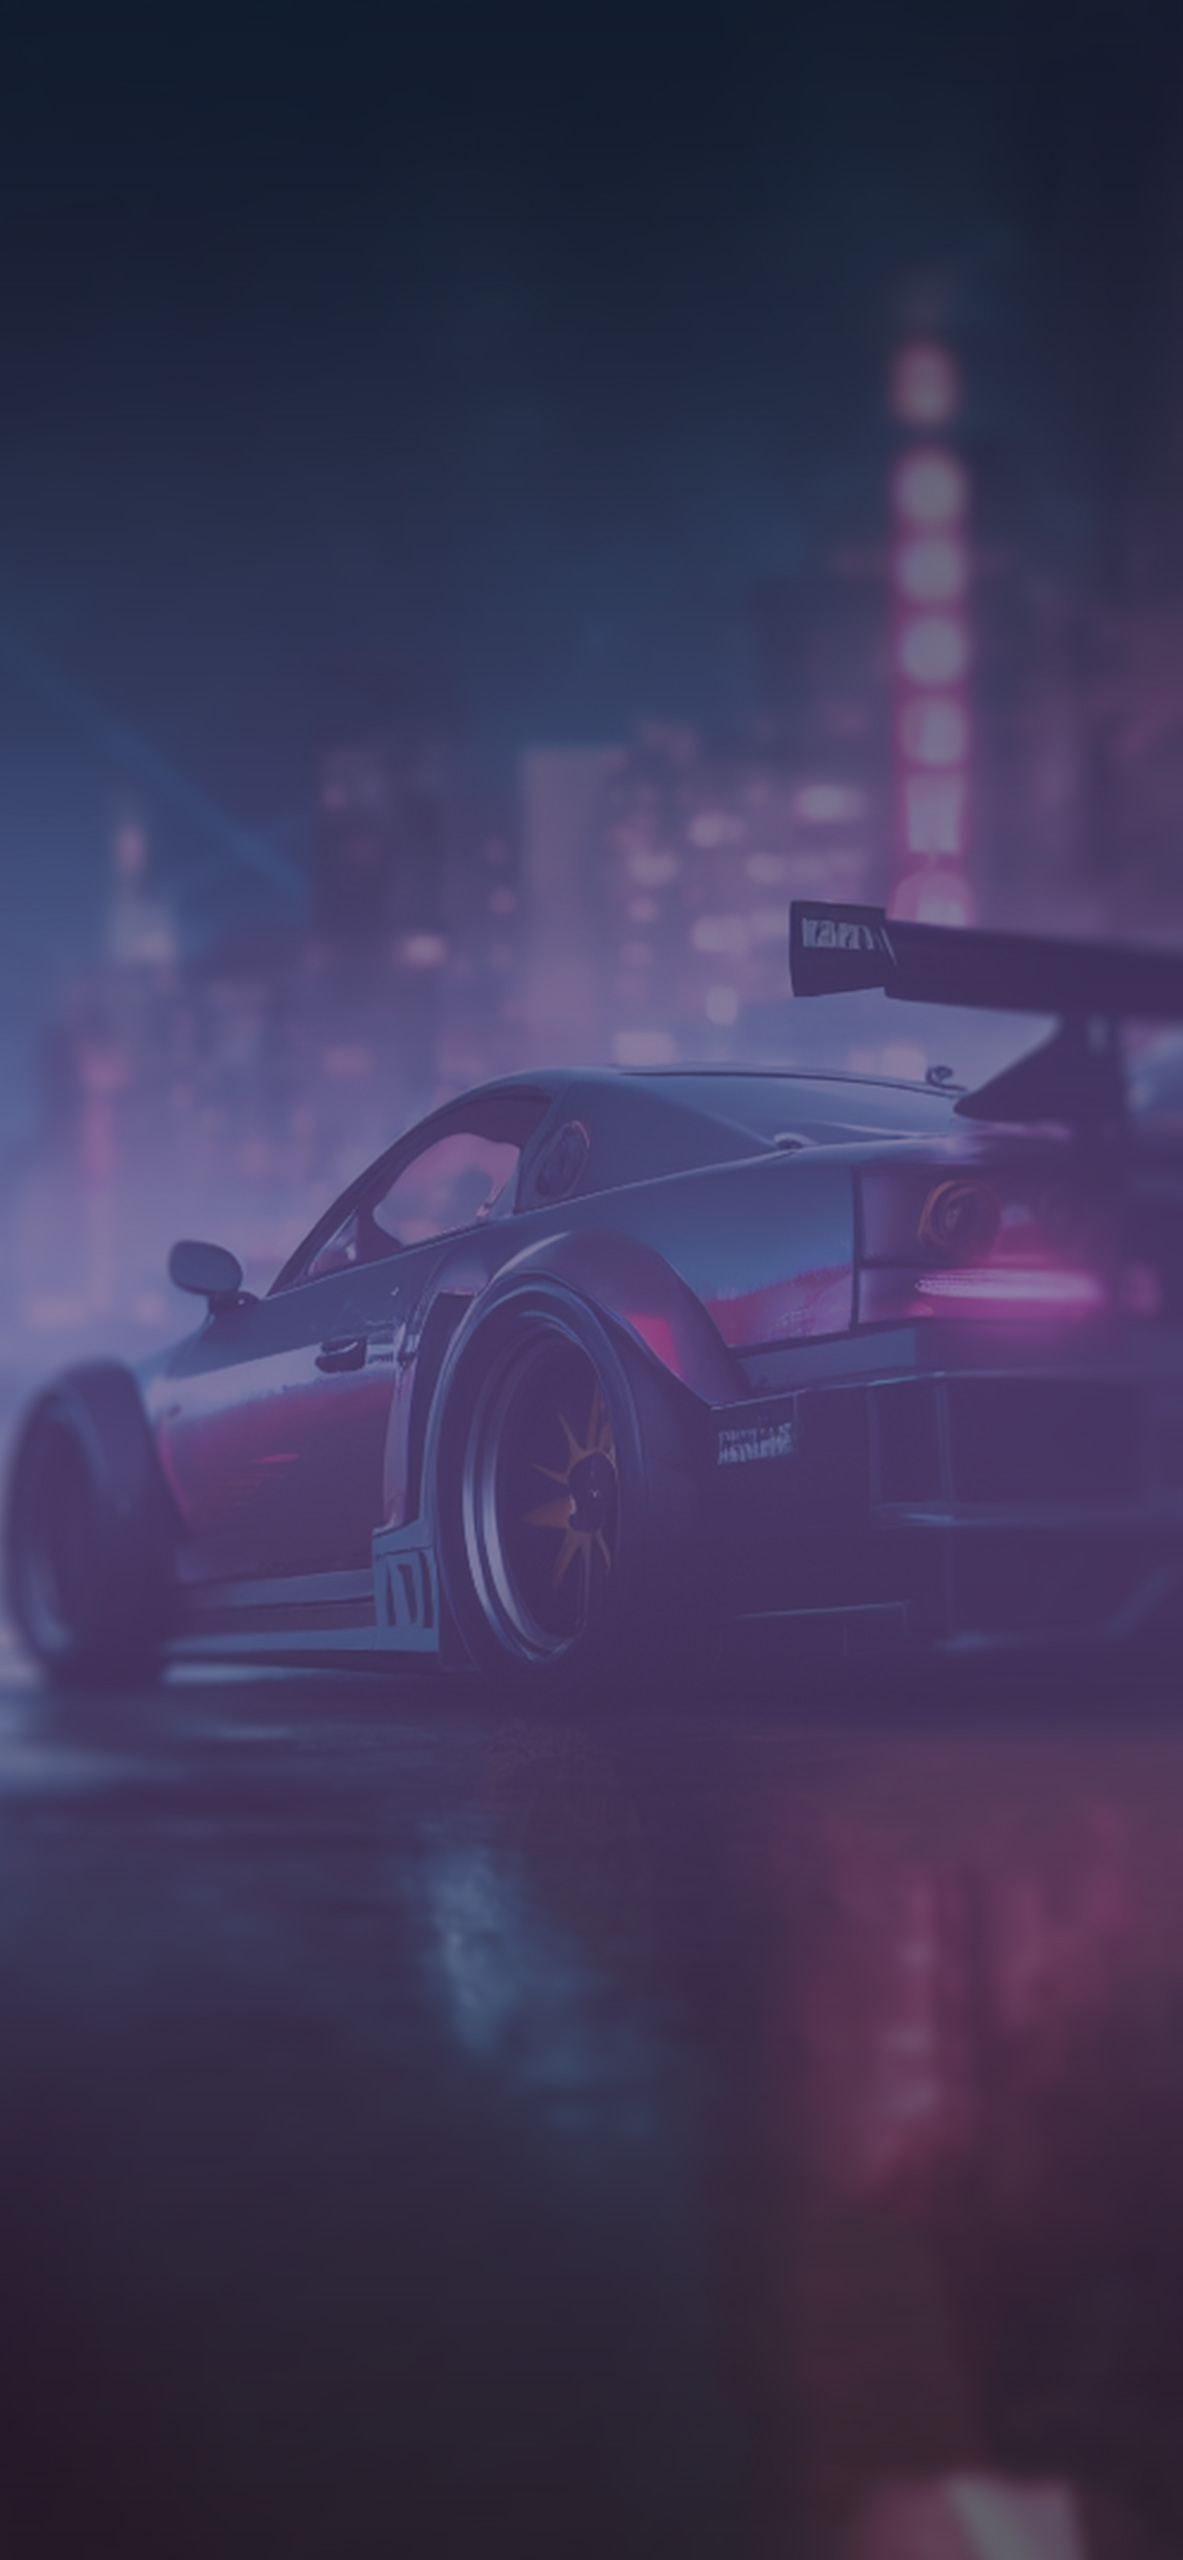 race car in night city background